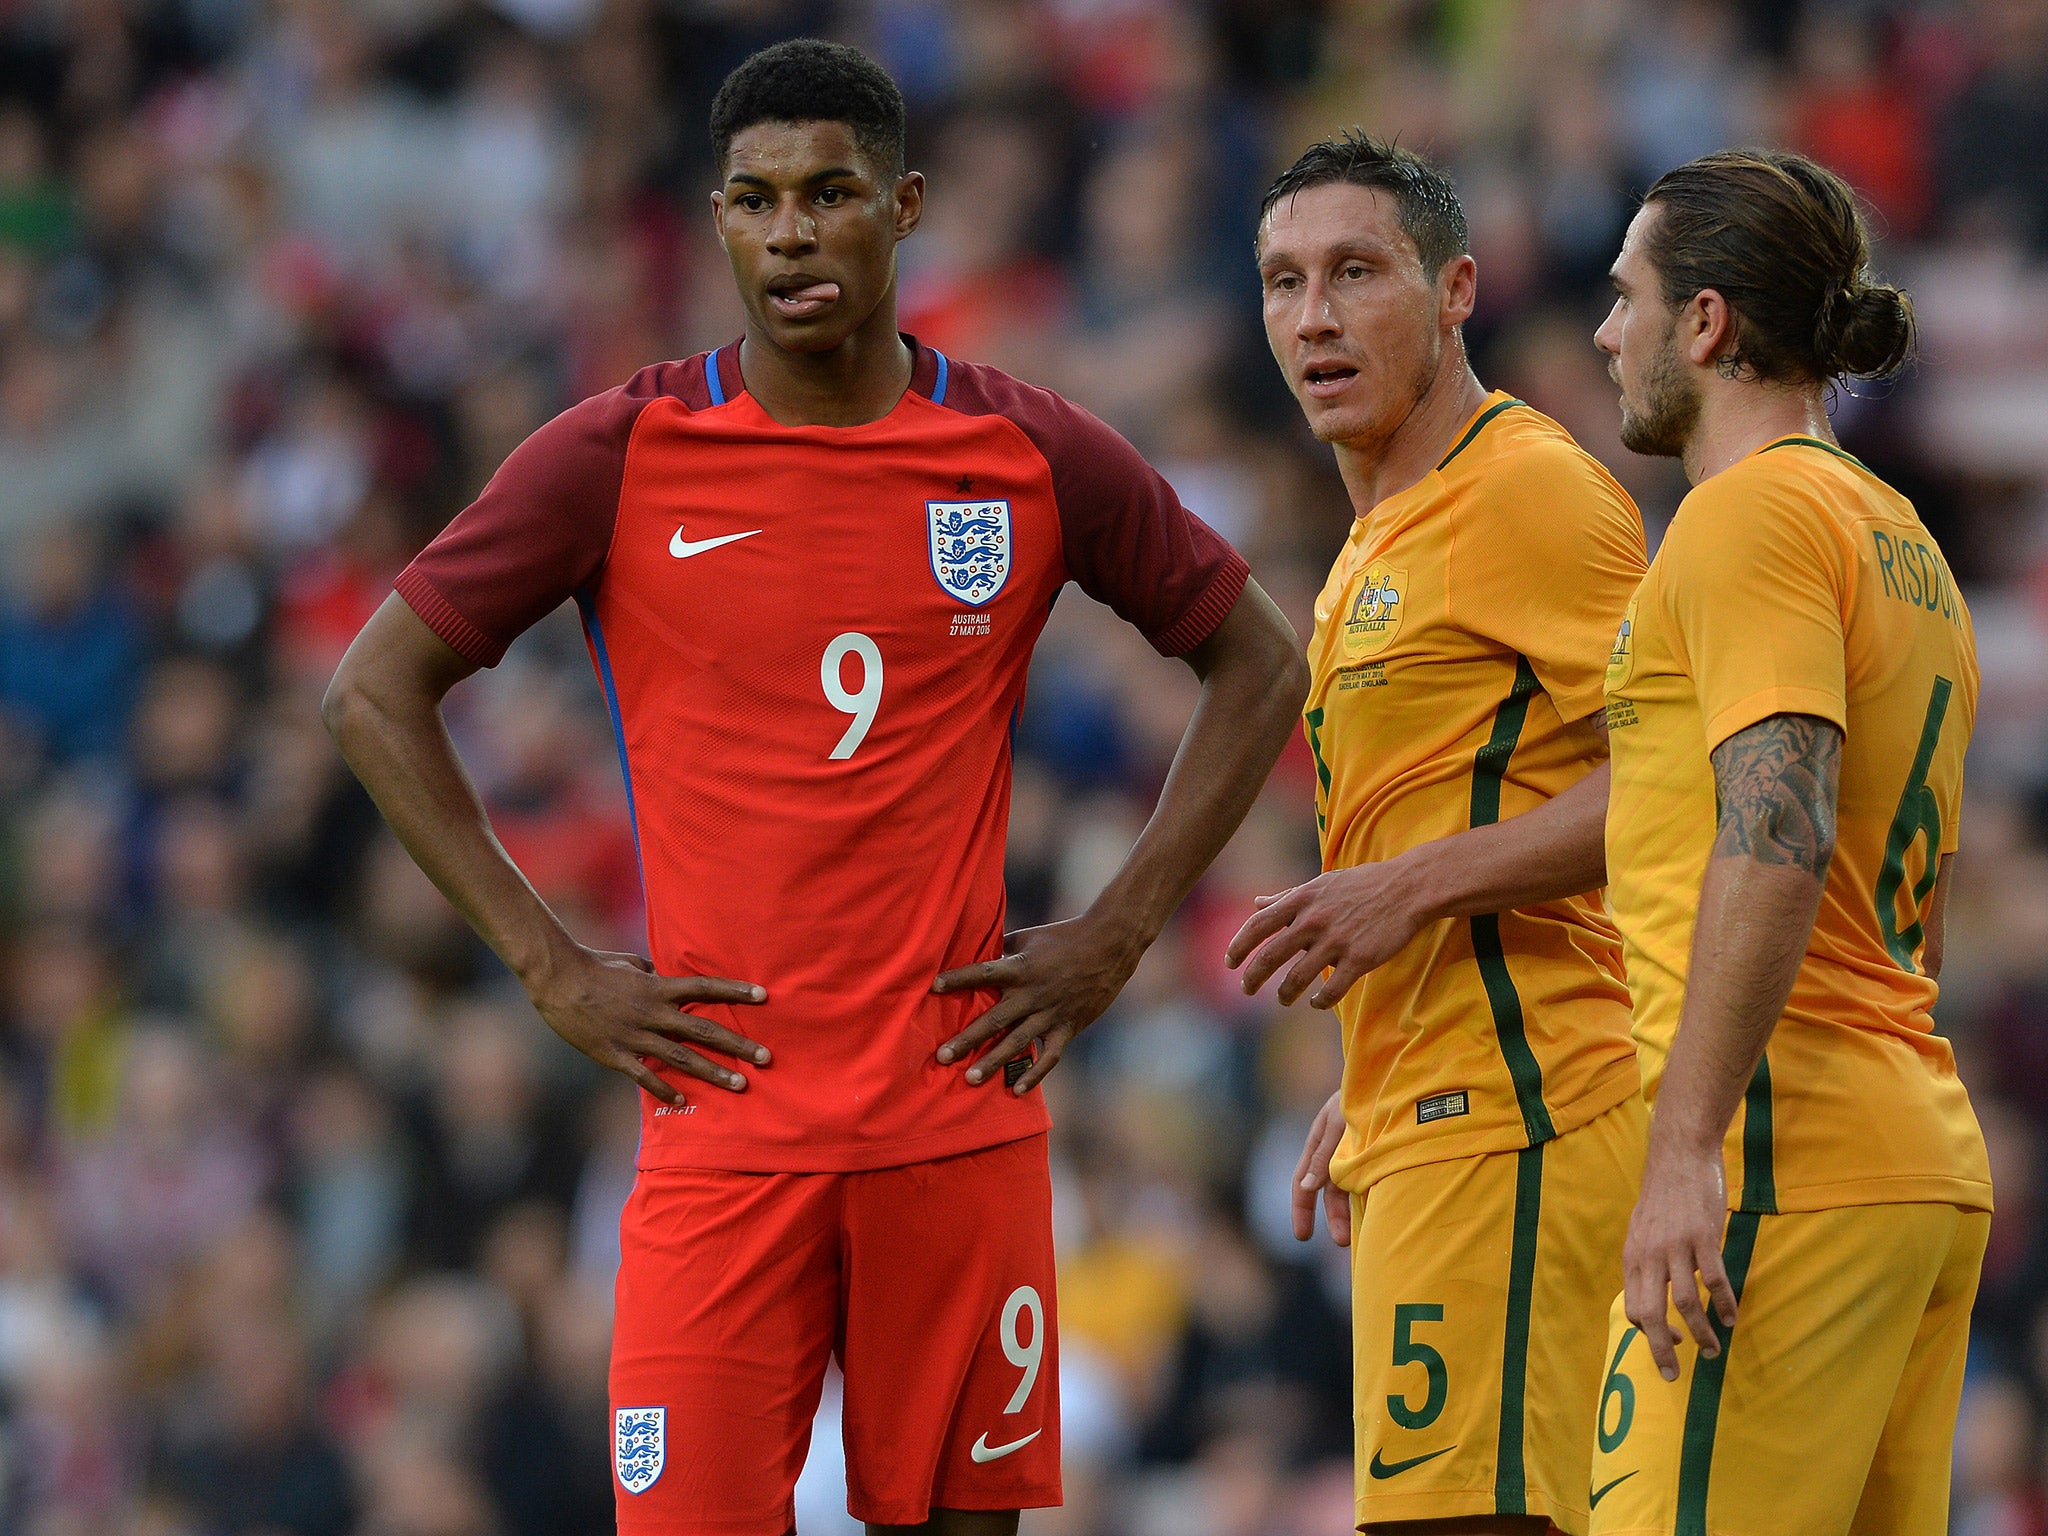 Marcus Rashford will find out on Tuesday if he has made England's Euro 2016 squad